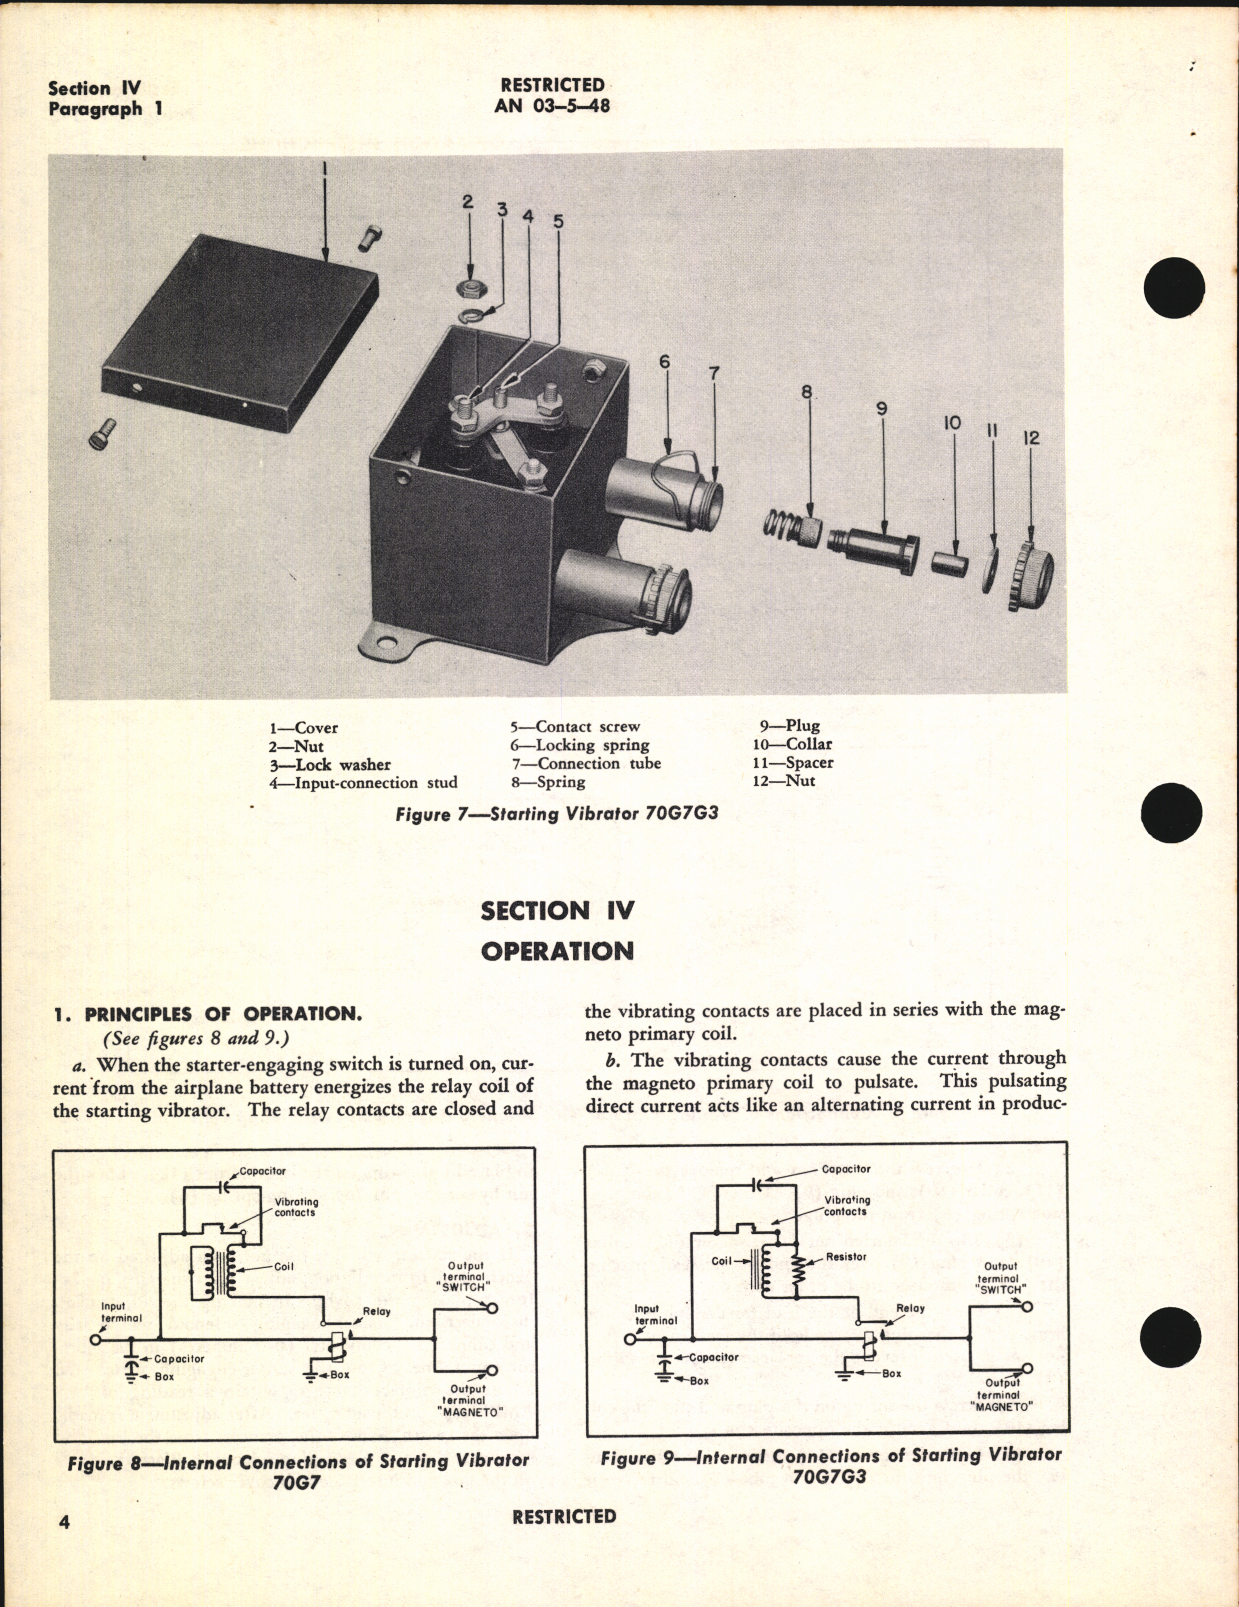 Sample page 8 from AirCorps Library document: Handbook of Instructions with Parts Catalog for Starting Vibrators 70G7 and 70G7G3